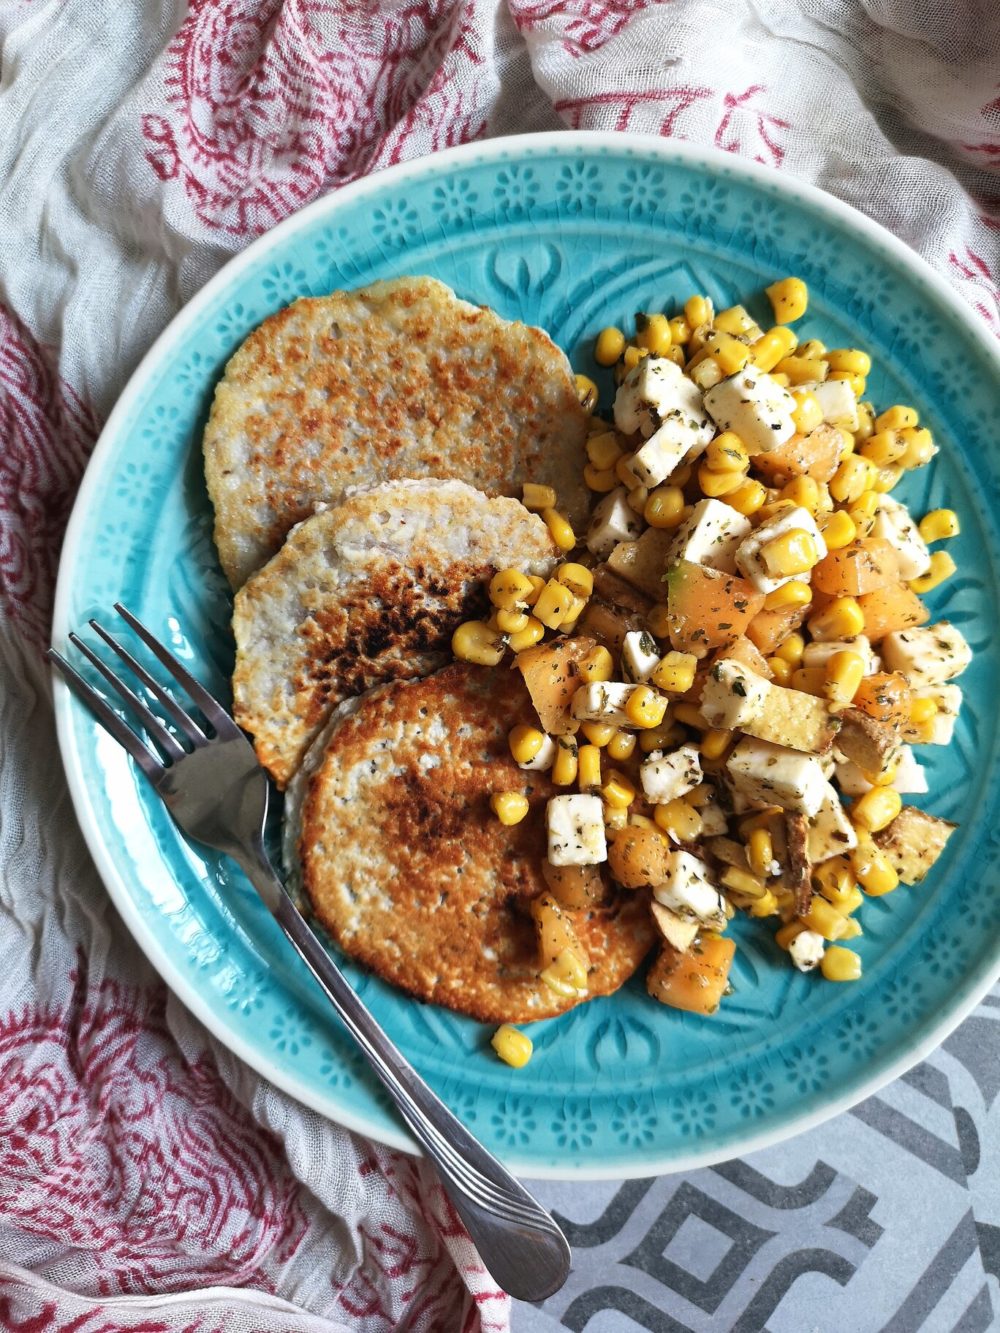 grilled melon and corn salad